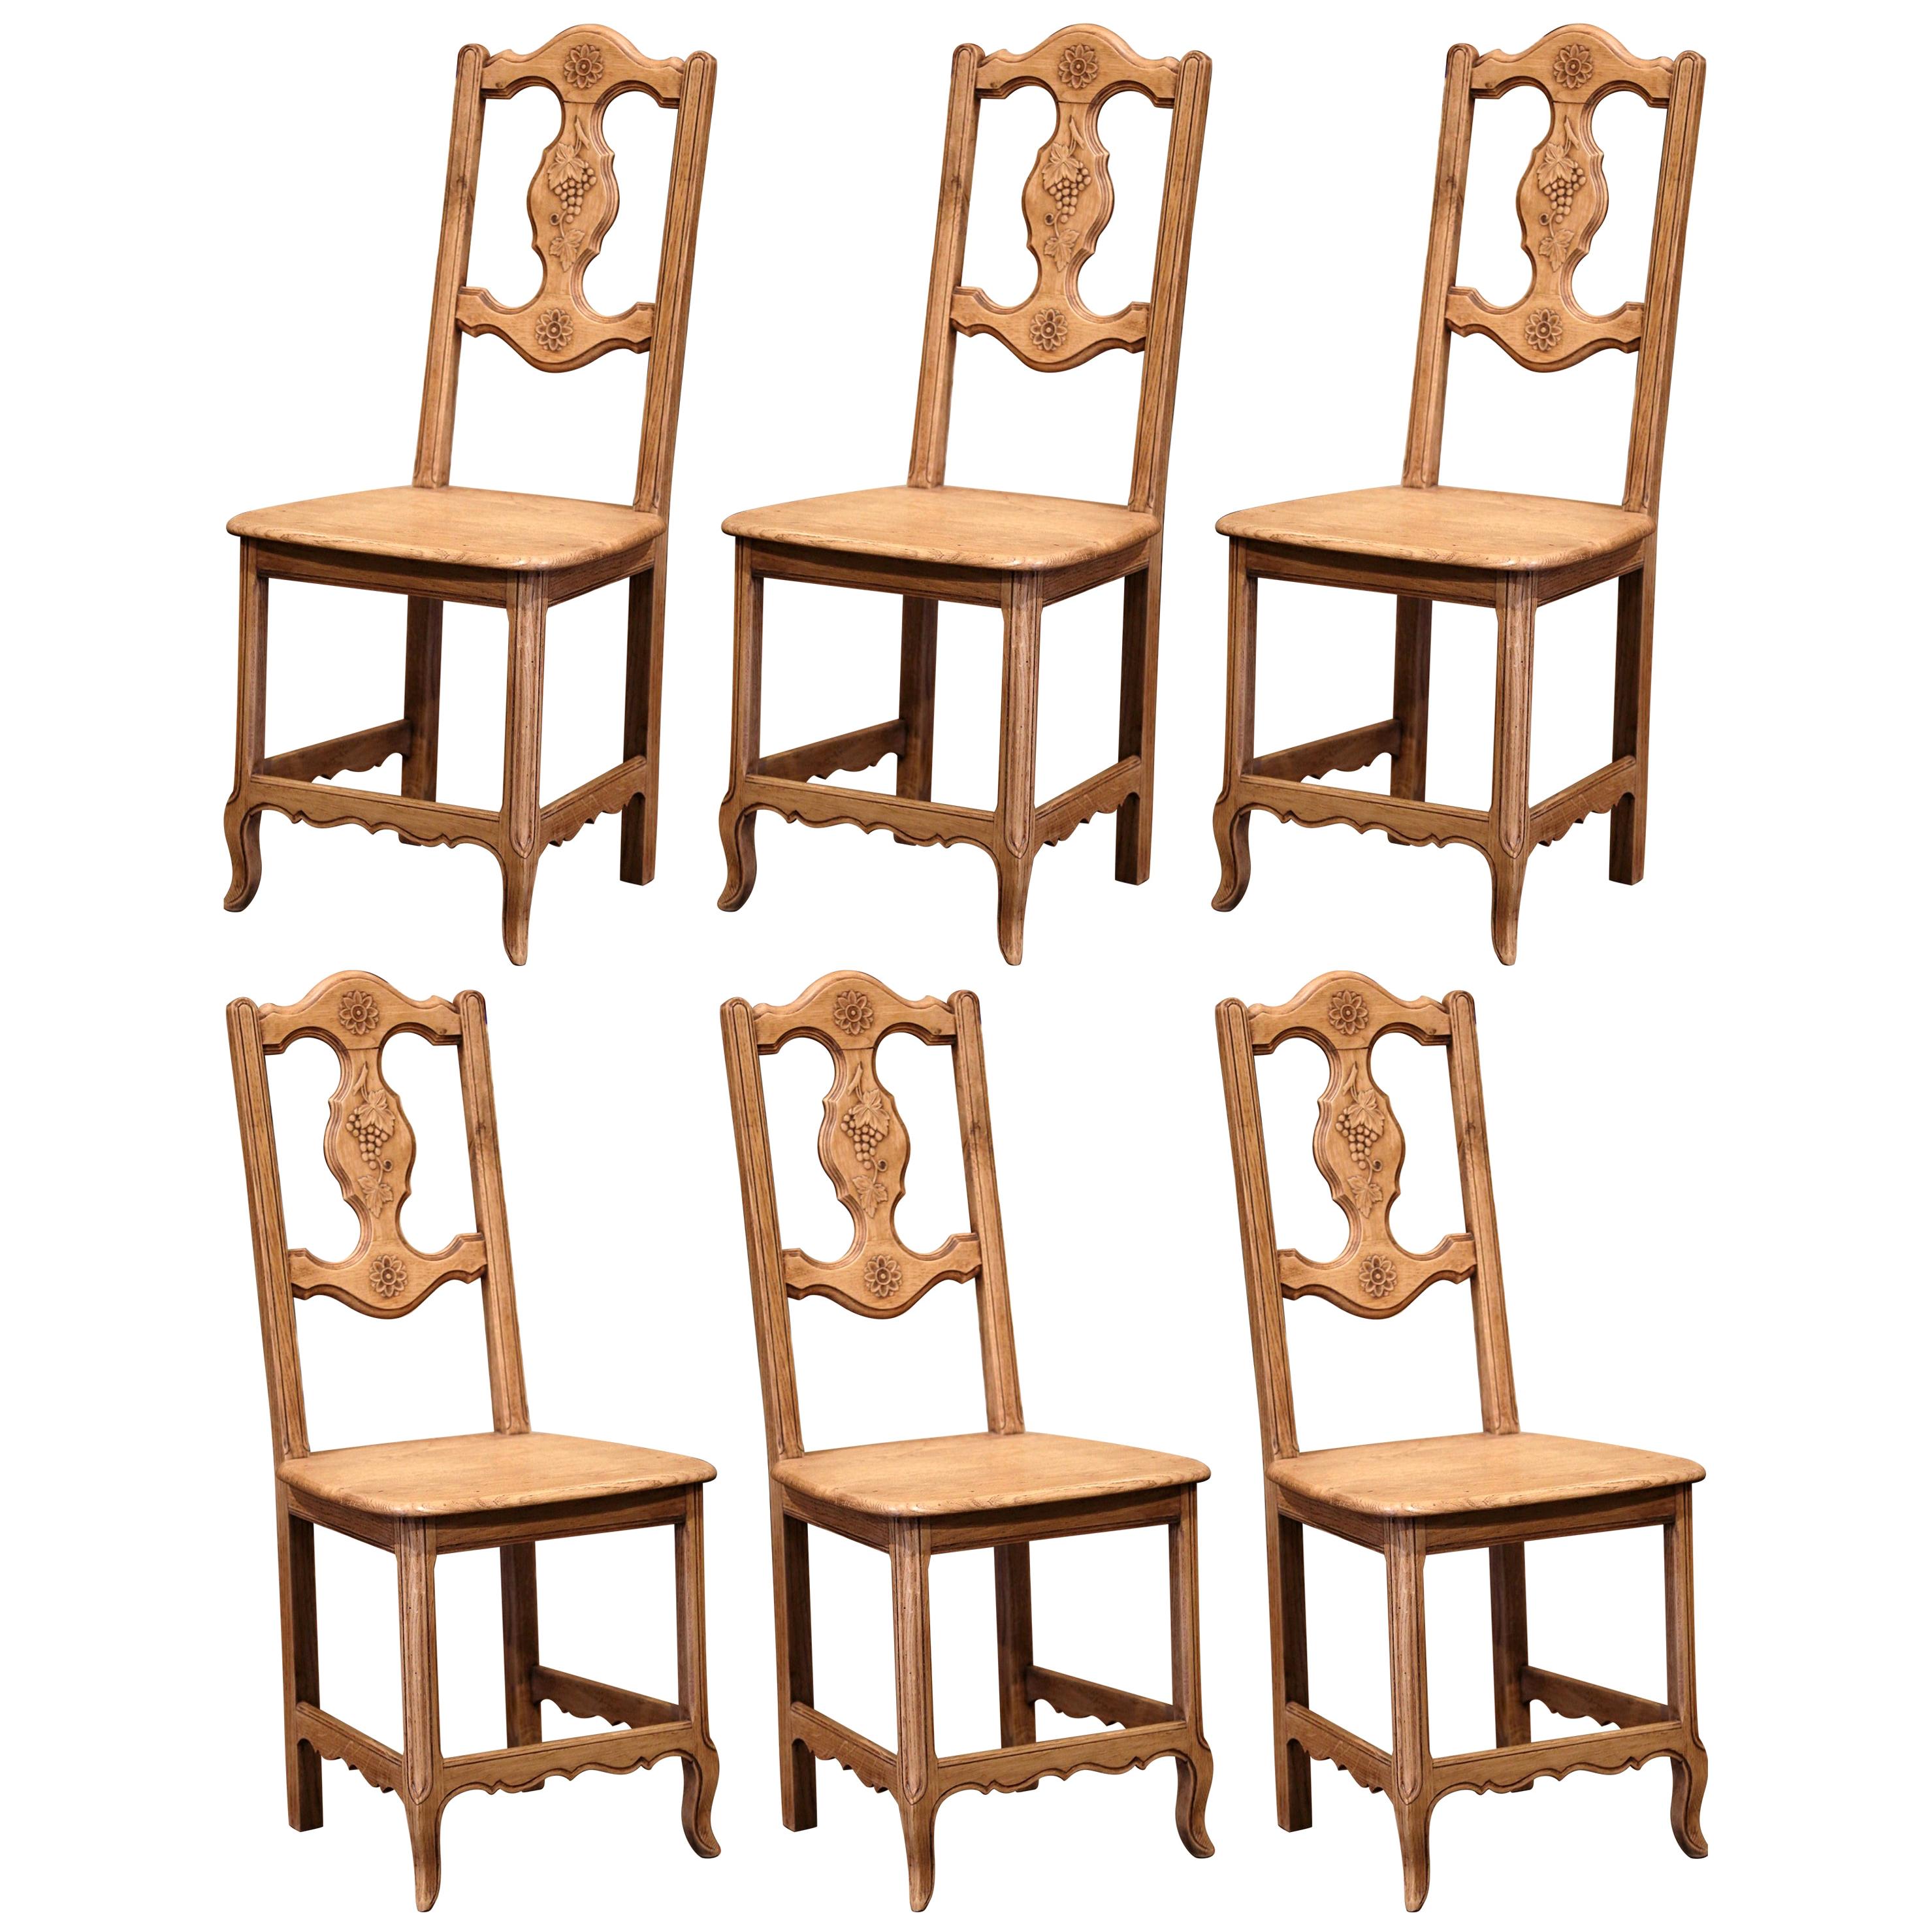 Early 20th Century French Carved Oak Dining Chairs with Vine Motifs, Set of Six